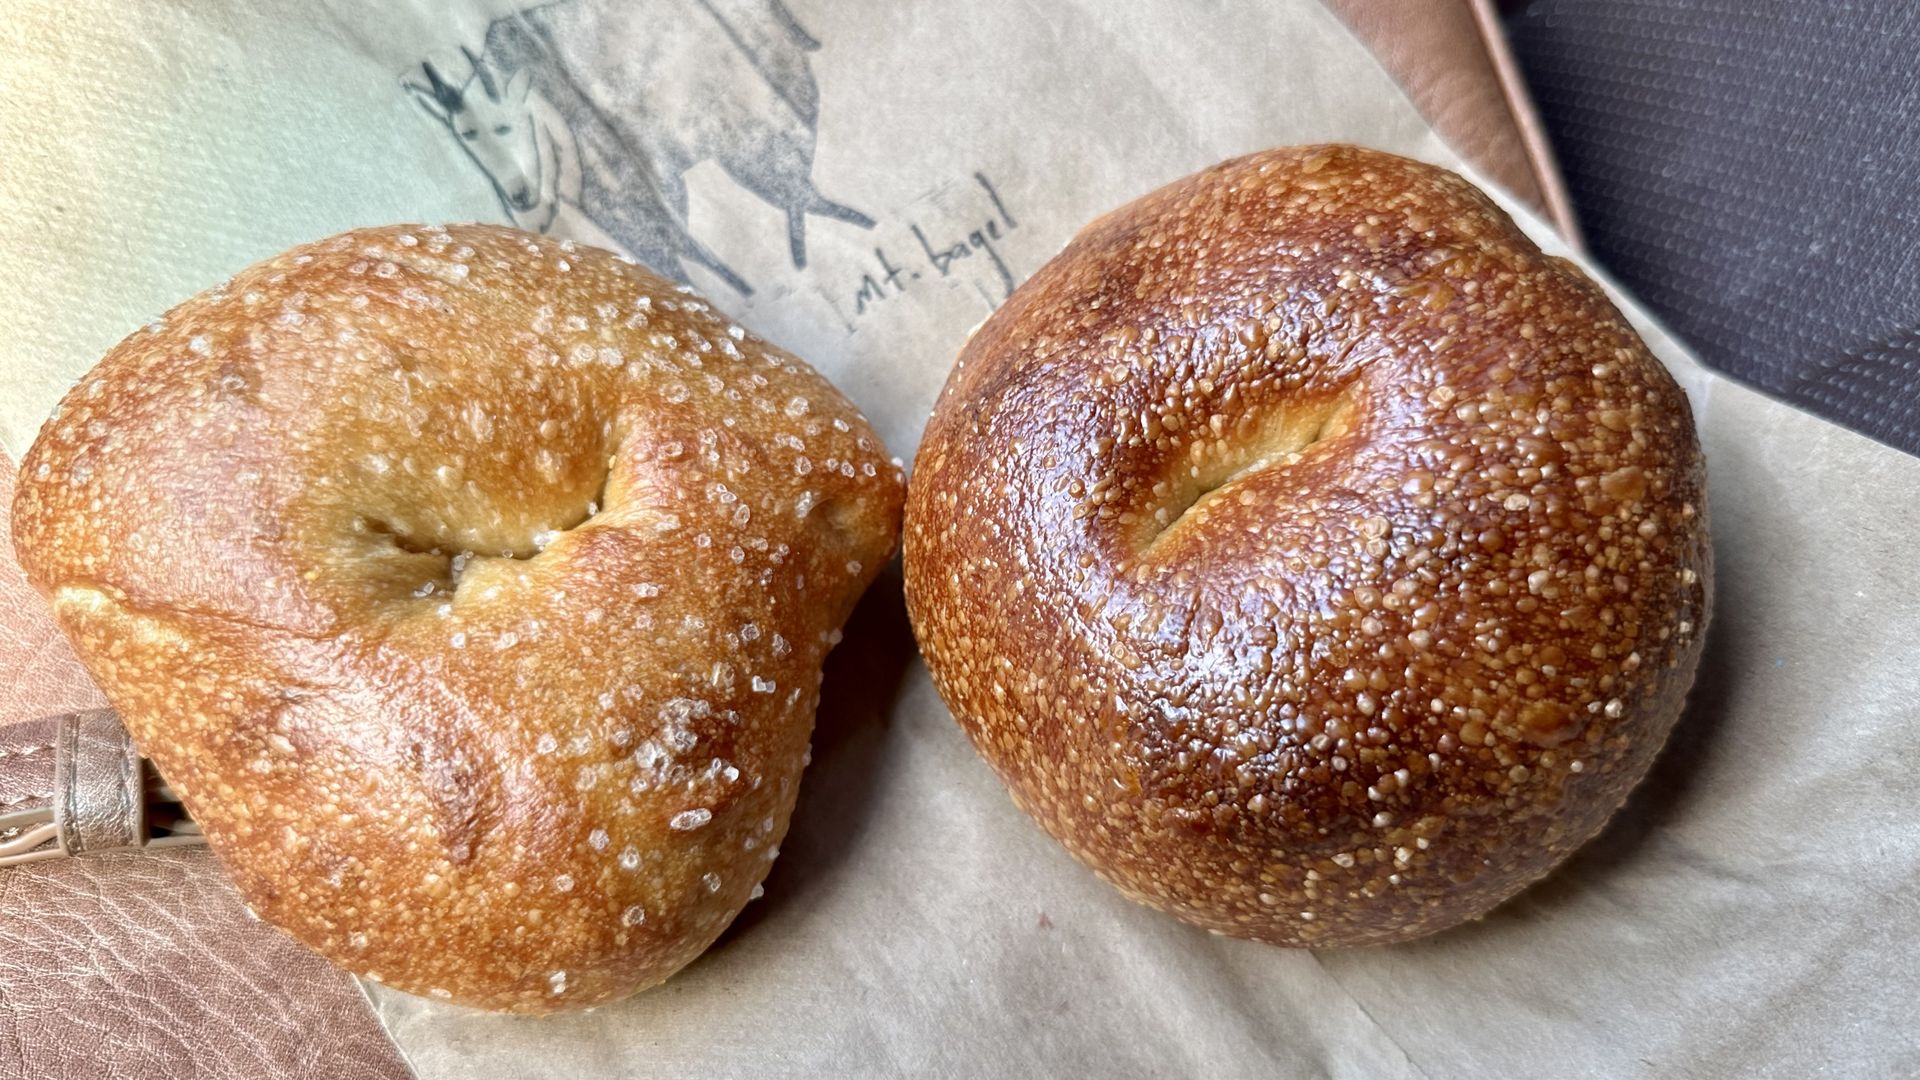 Two bagels side by side on a paper bag.